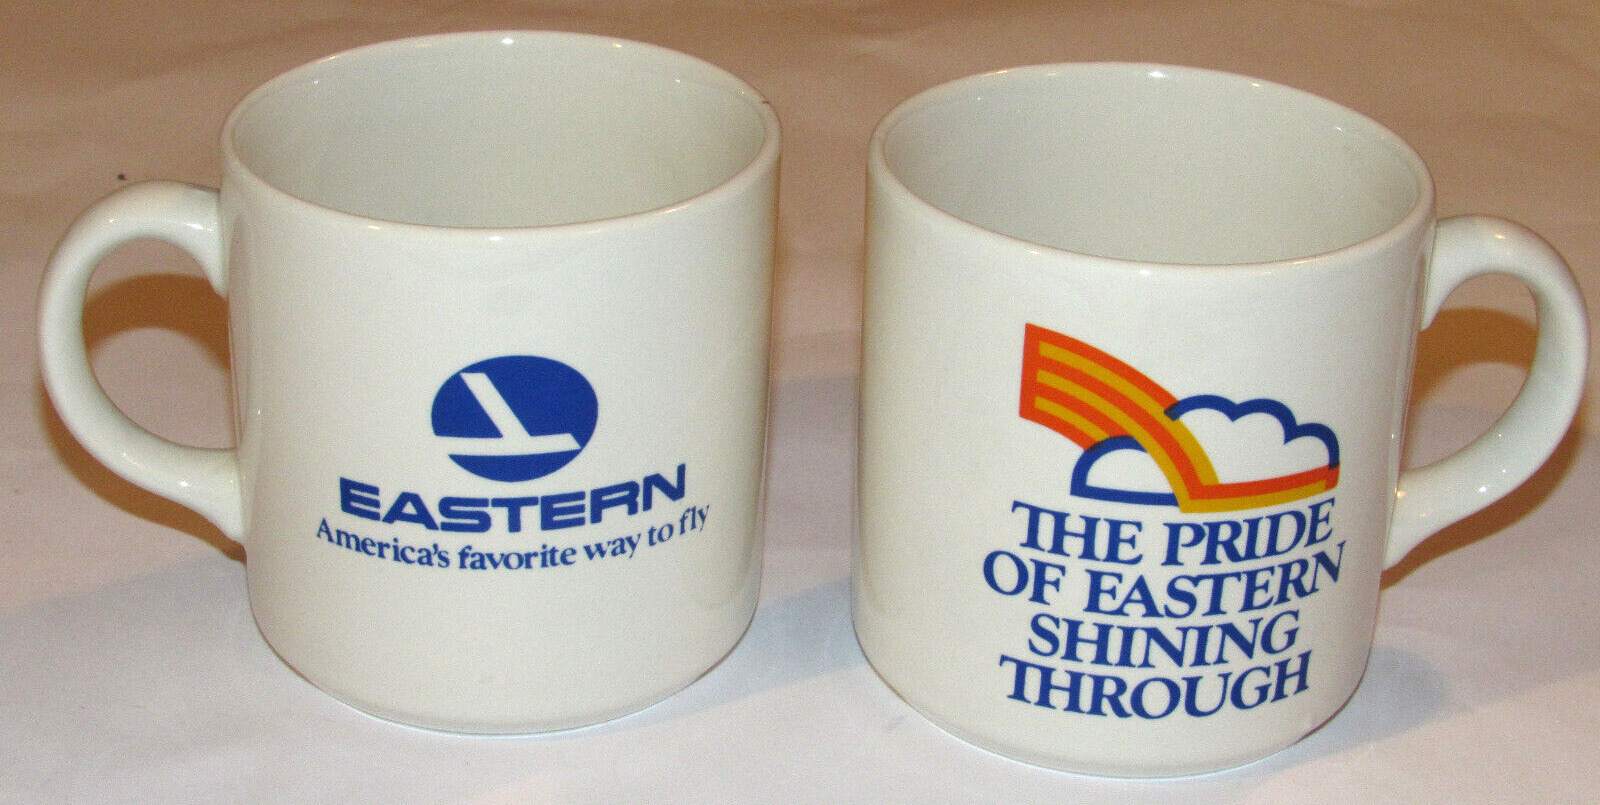 2 VTG EASTERN AIR LINES COFFEE MUGS/CUPS THE PRIDE OF EASTERN SHINING THROUGH